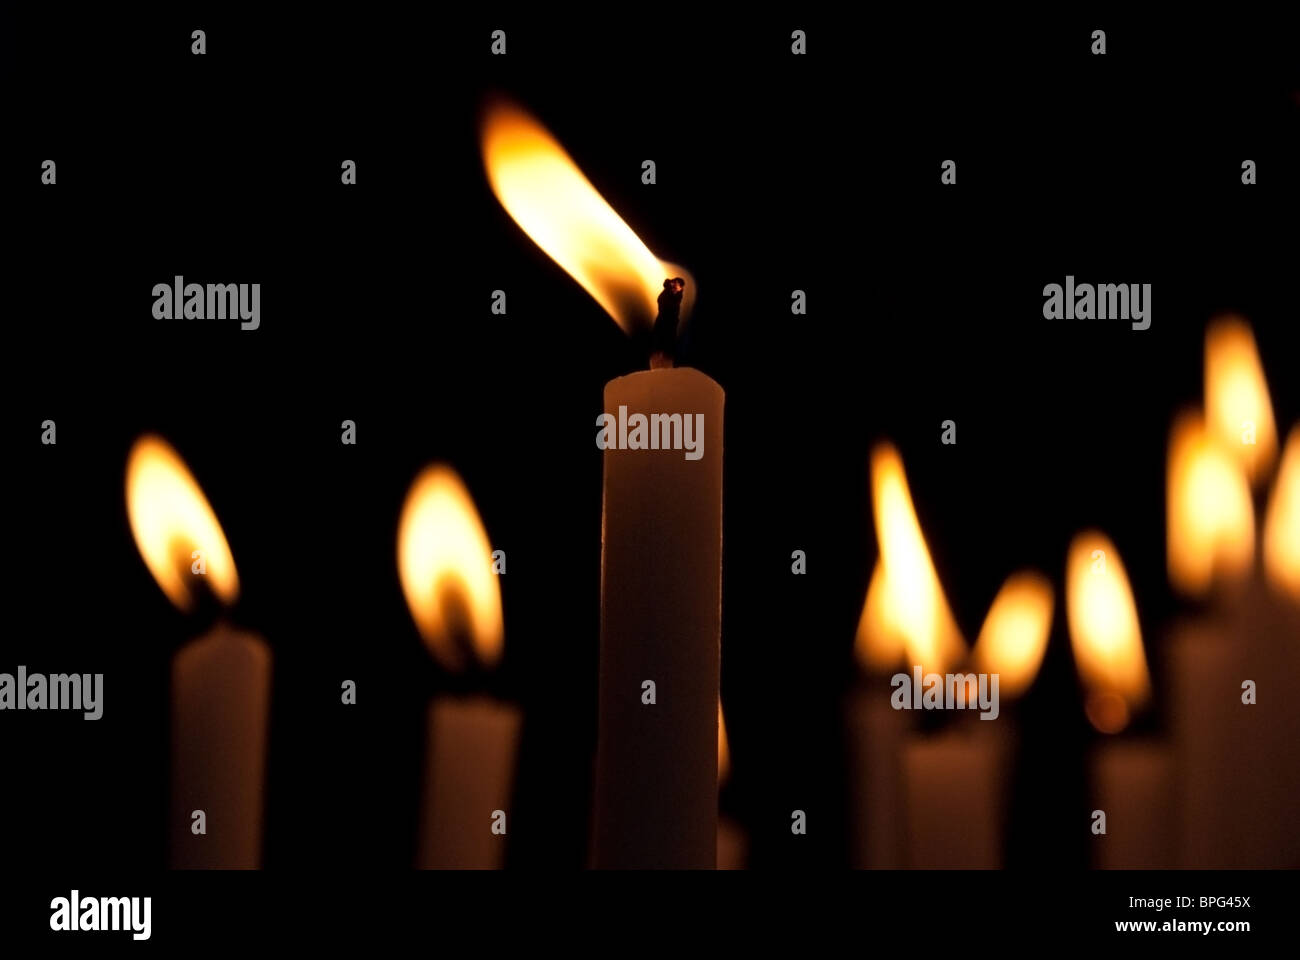 Flame of candles Stock Photo